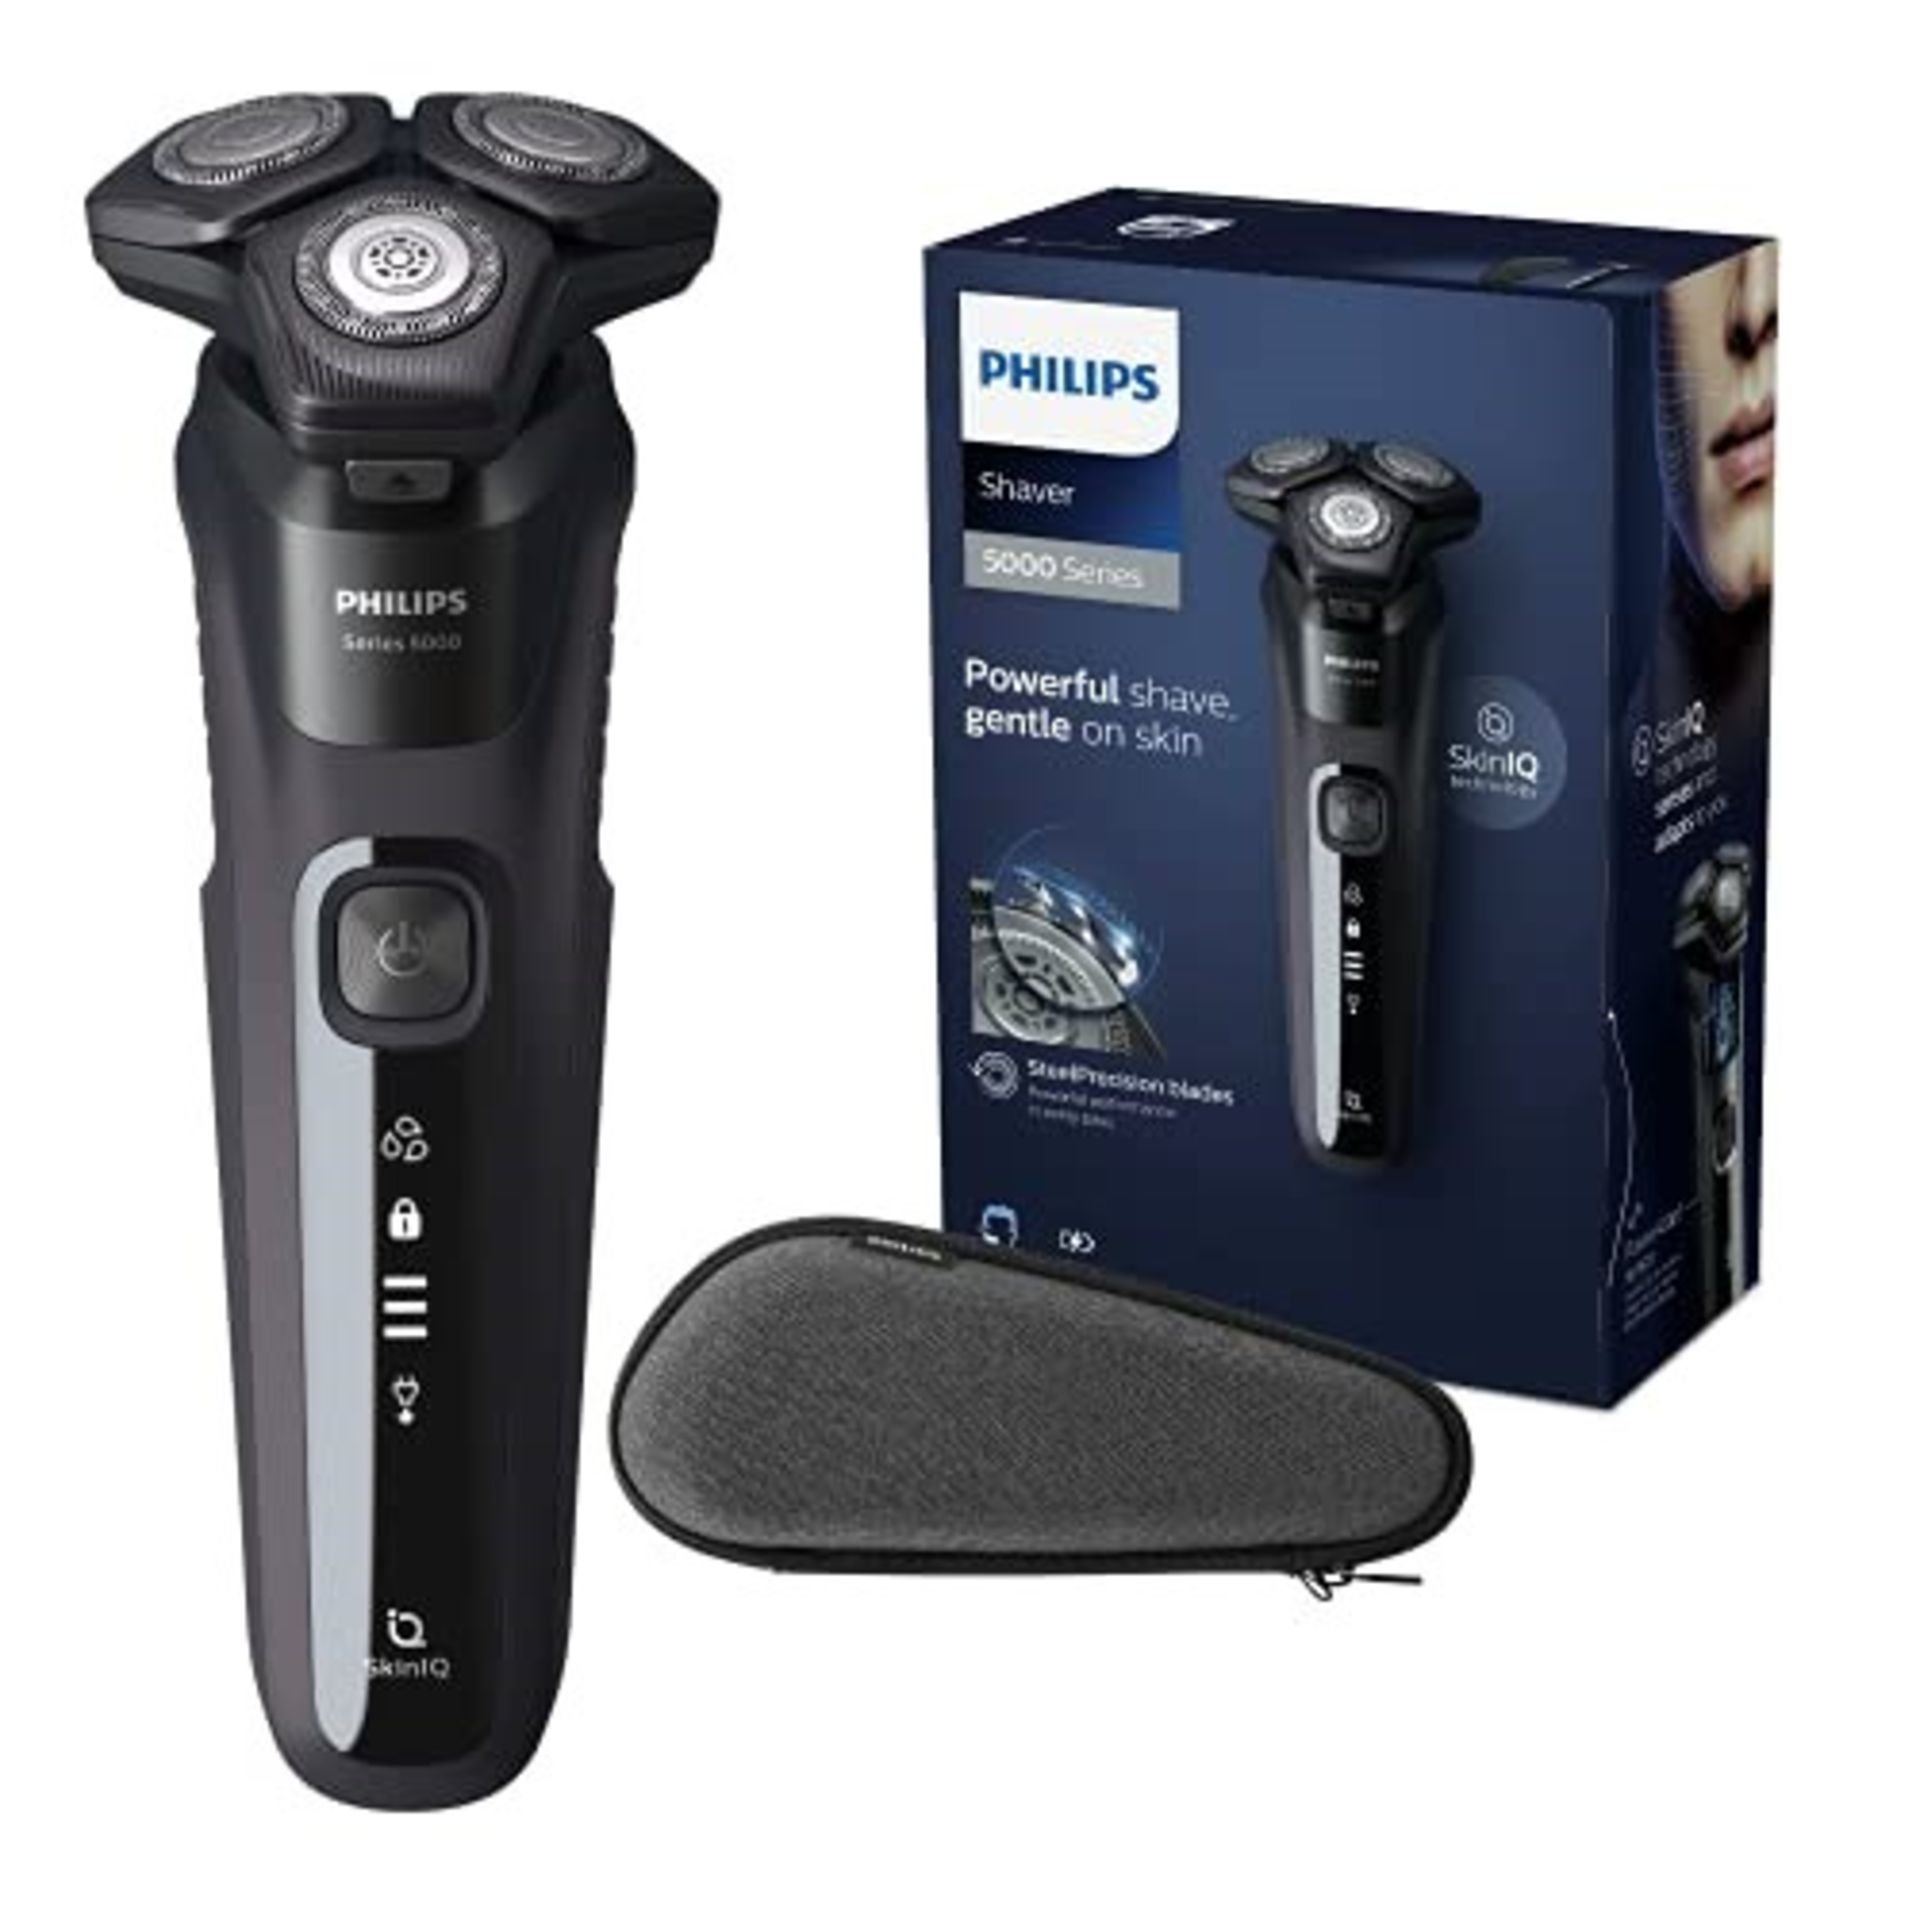 RRP £89.00 Philips Shaver Series 5000 Dry and Wet Electric Shaver for Men (Model S5588/30)